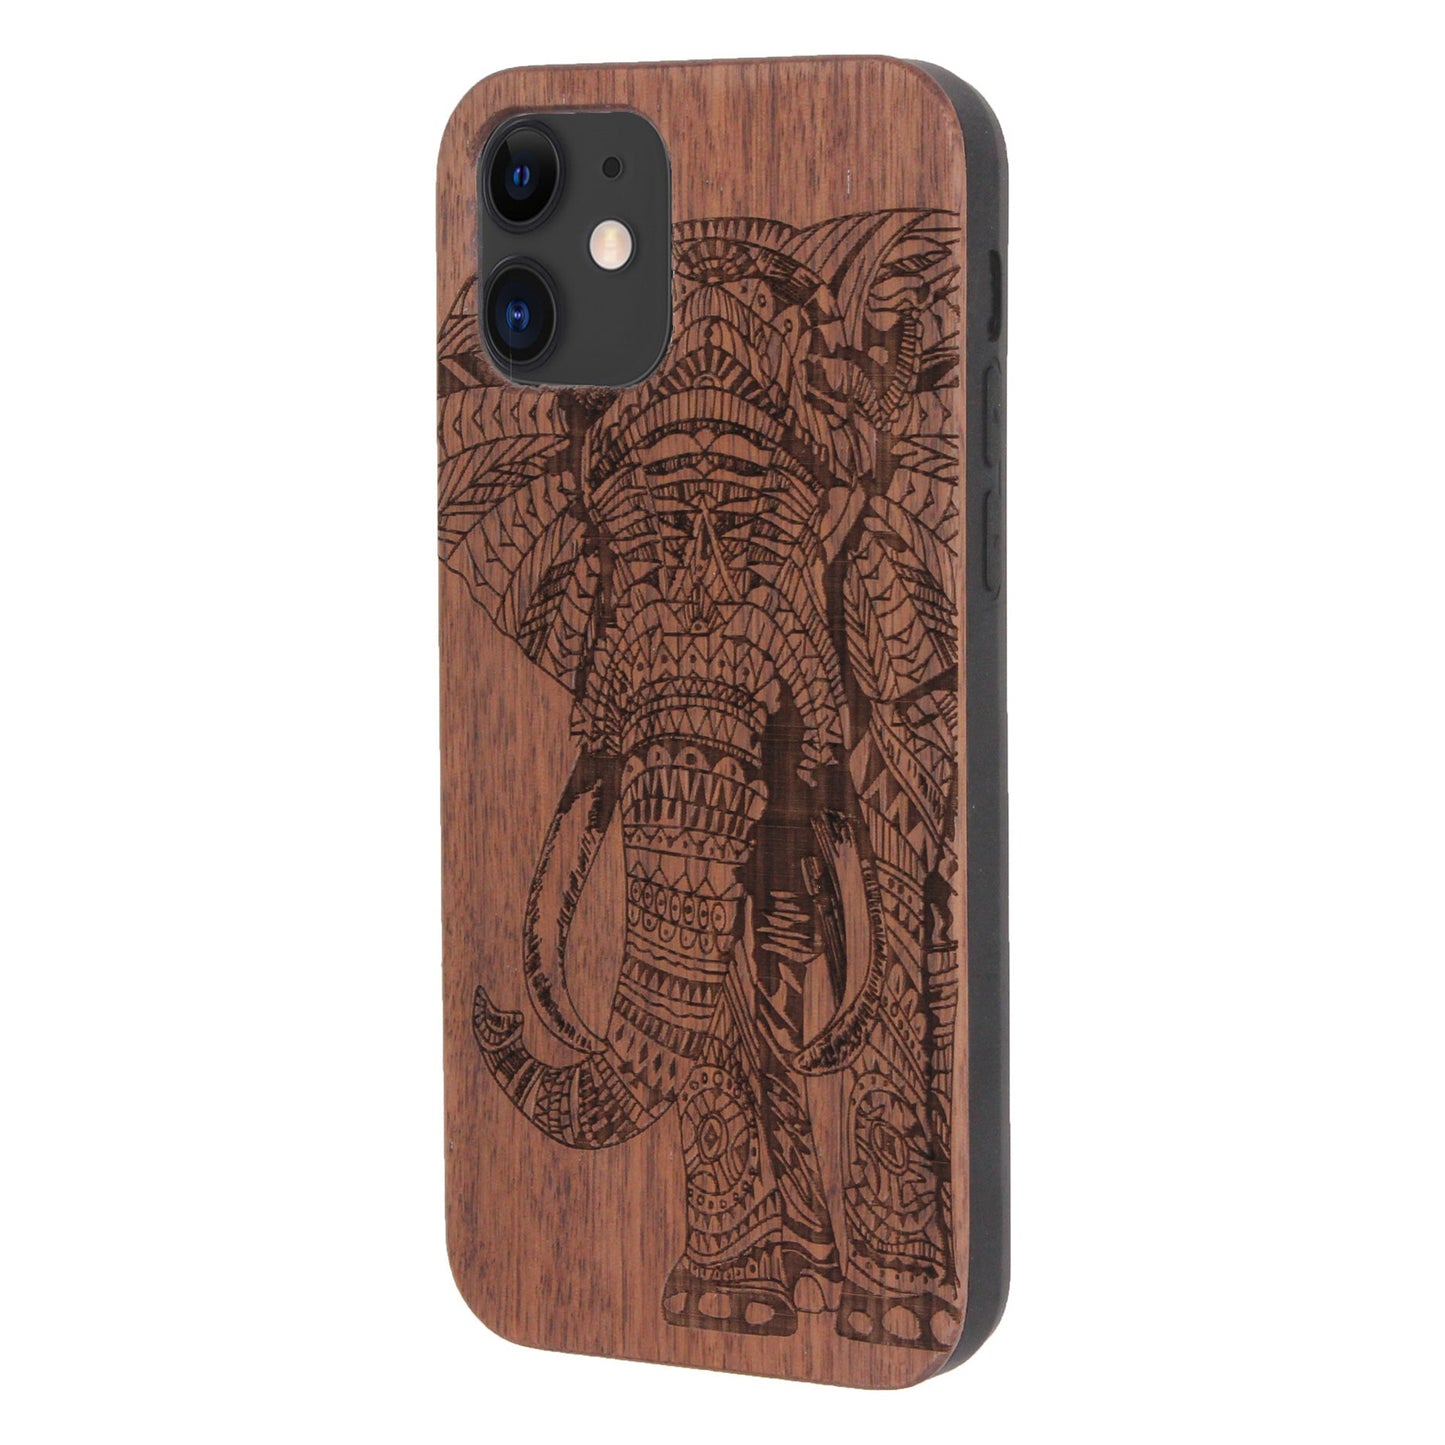 Elephant Eden case made of walnut wood for iPhone 11 